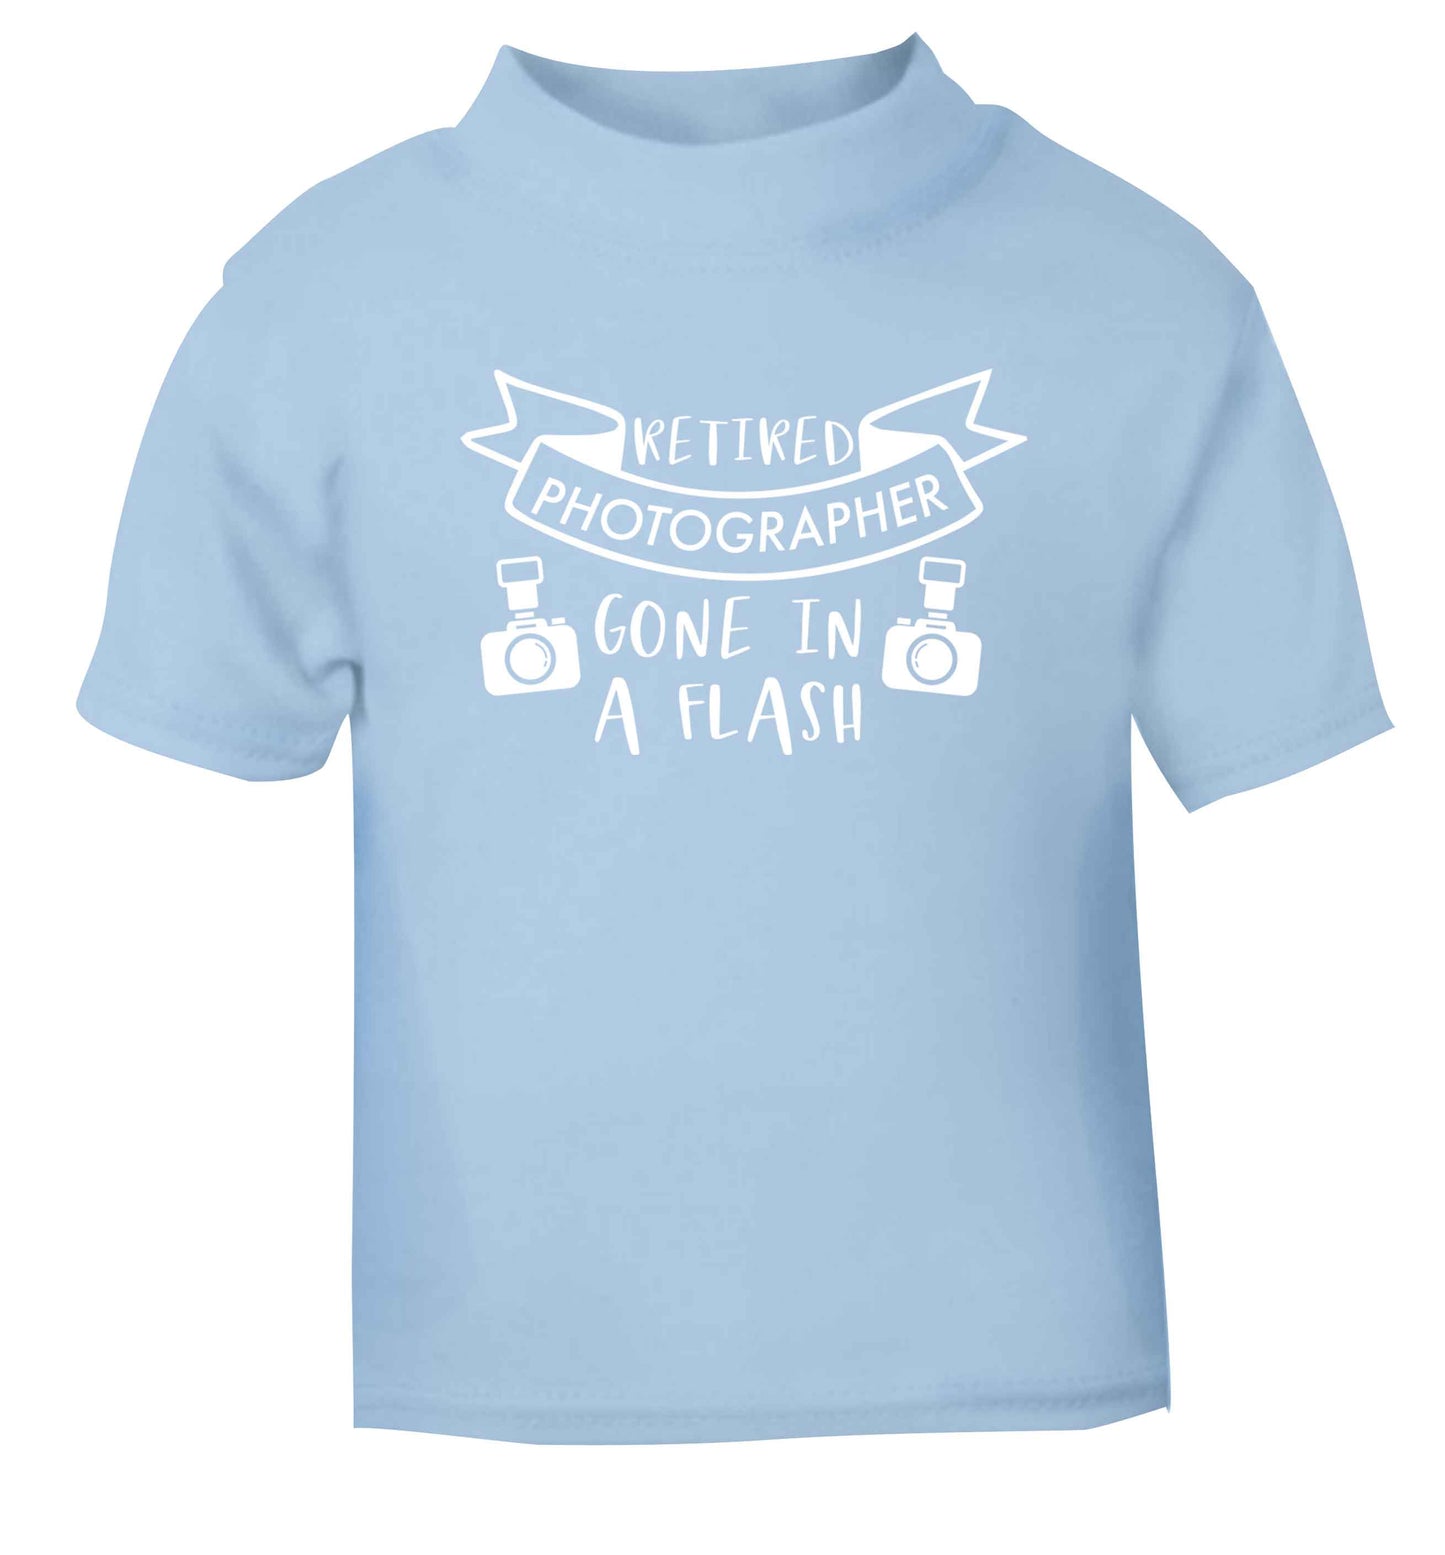 Retired photographer gone in a flash light blue Baby Toddler Tshirt 2 Years